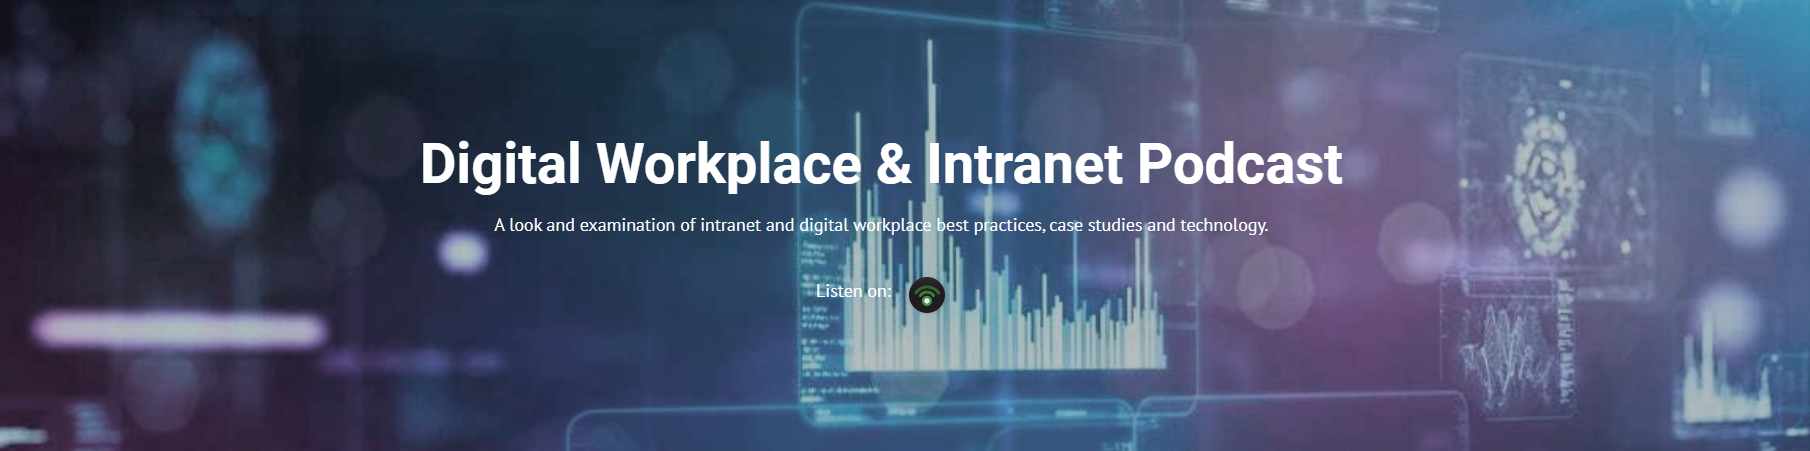 The Digital Workplace & Intranet Podcast title image